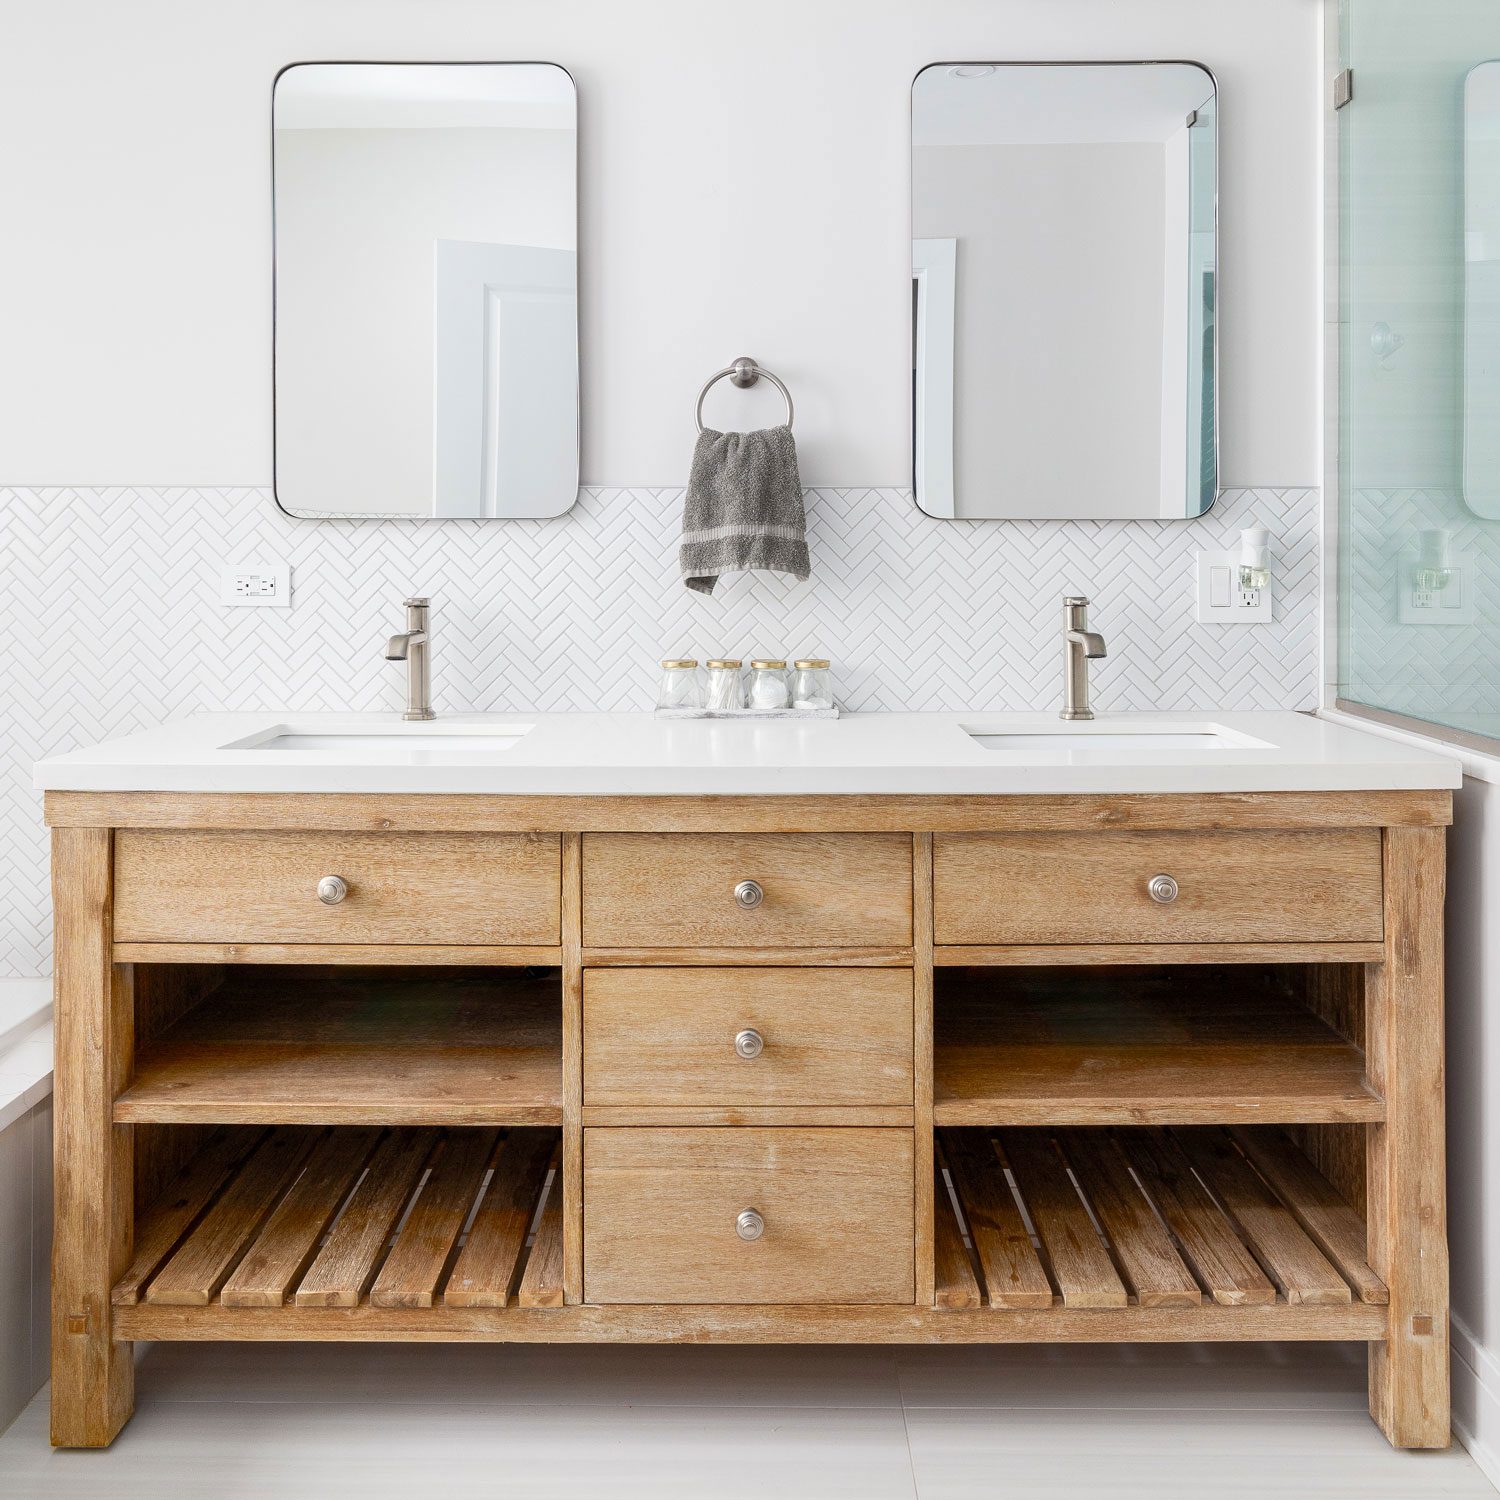 How to Make the Most of Your Small Bathroom with a 30 Inch Vanity